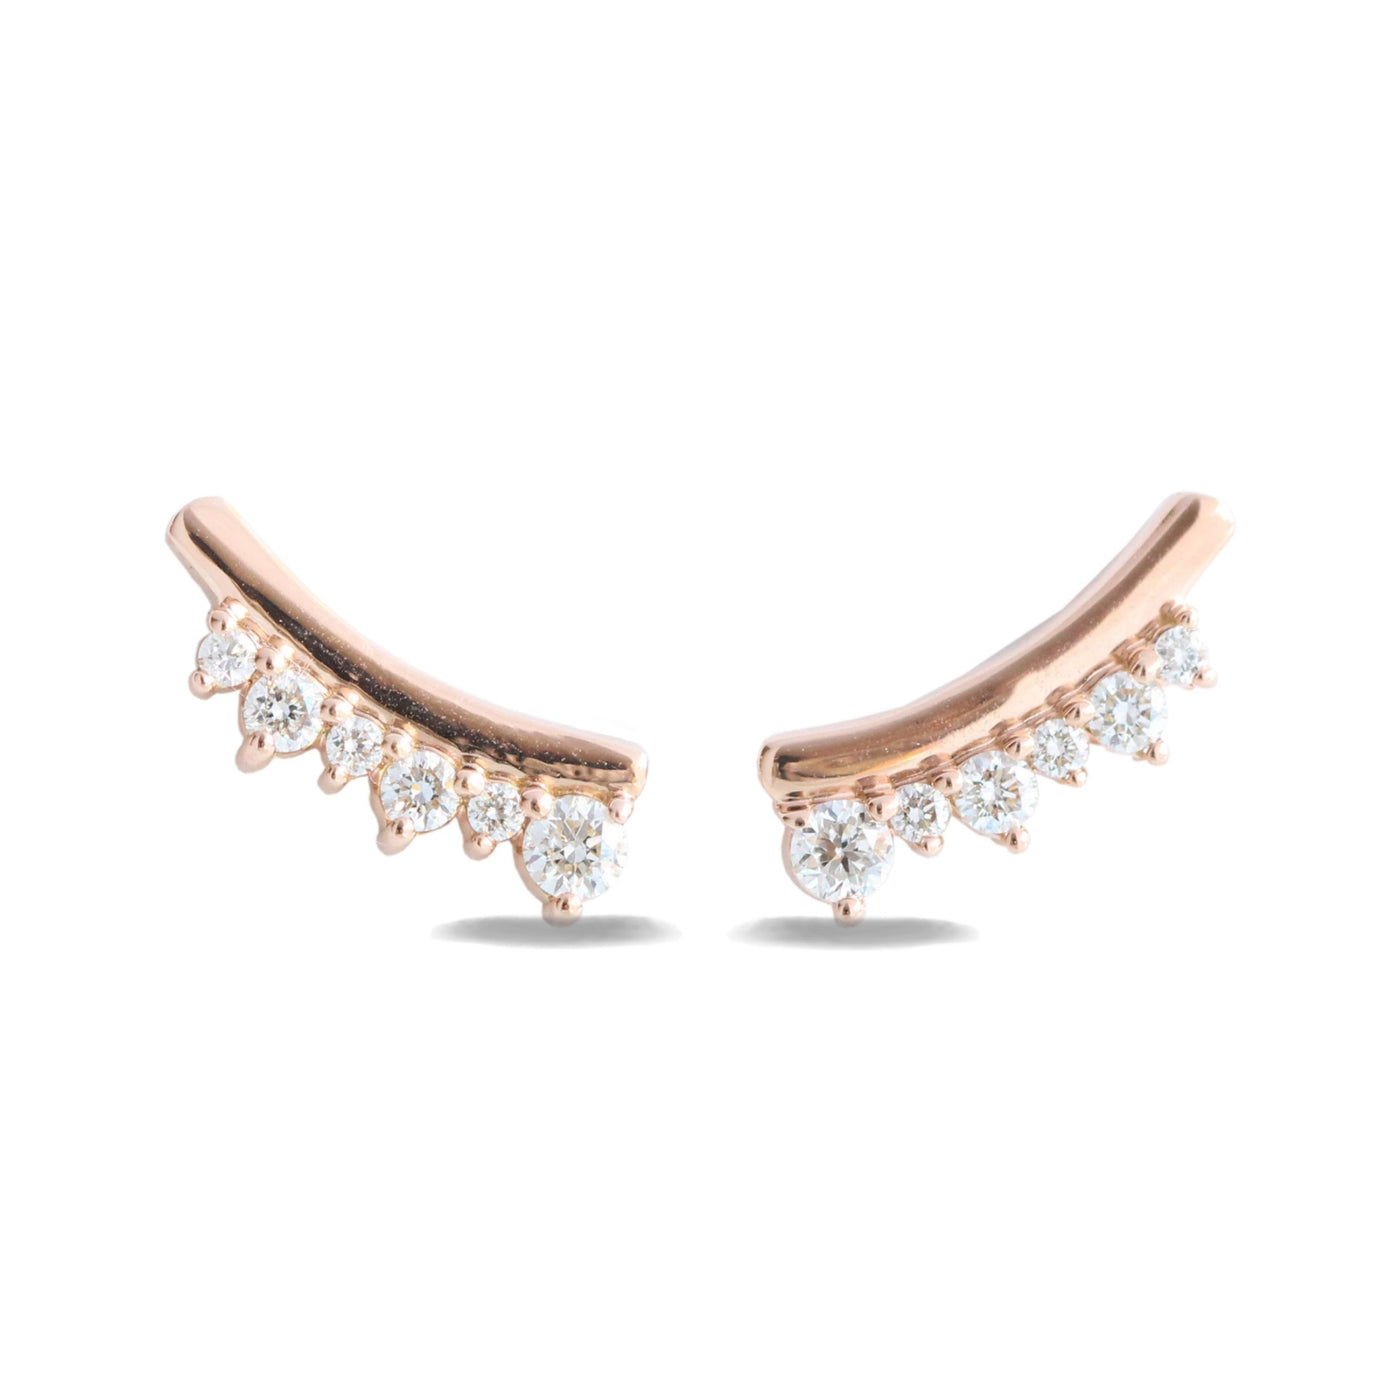 Curved Crown Diamond Earrings in Rose Gold Studs | La More Design